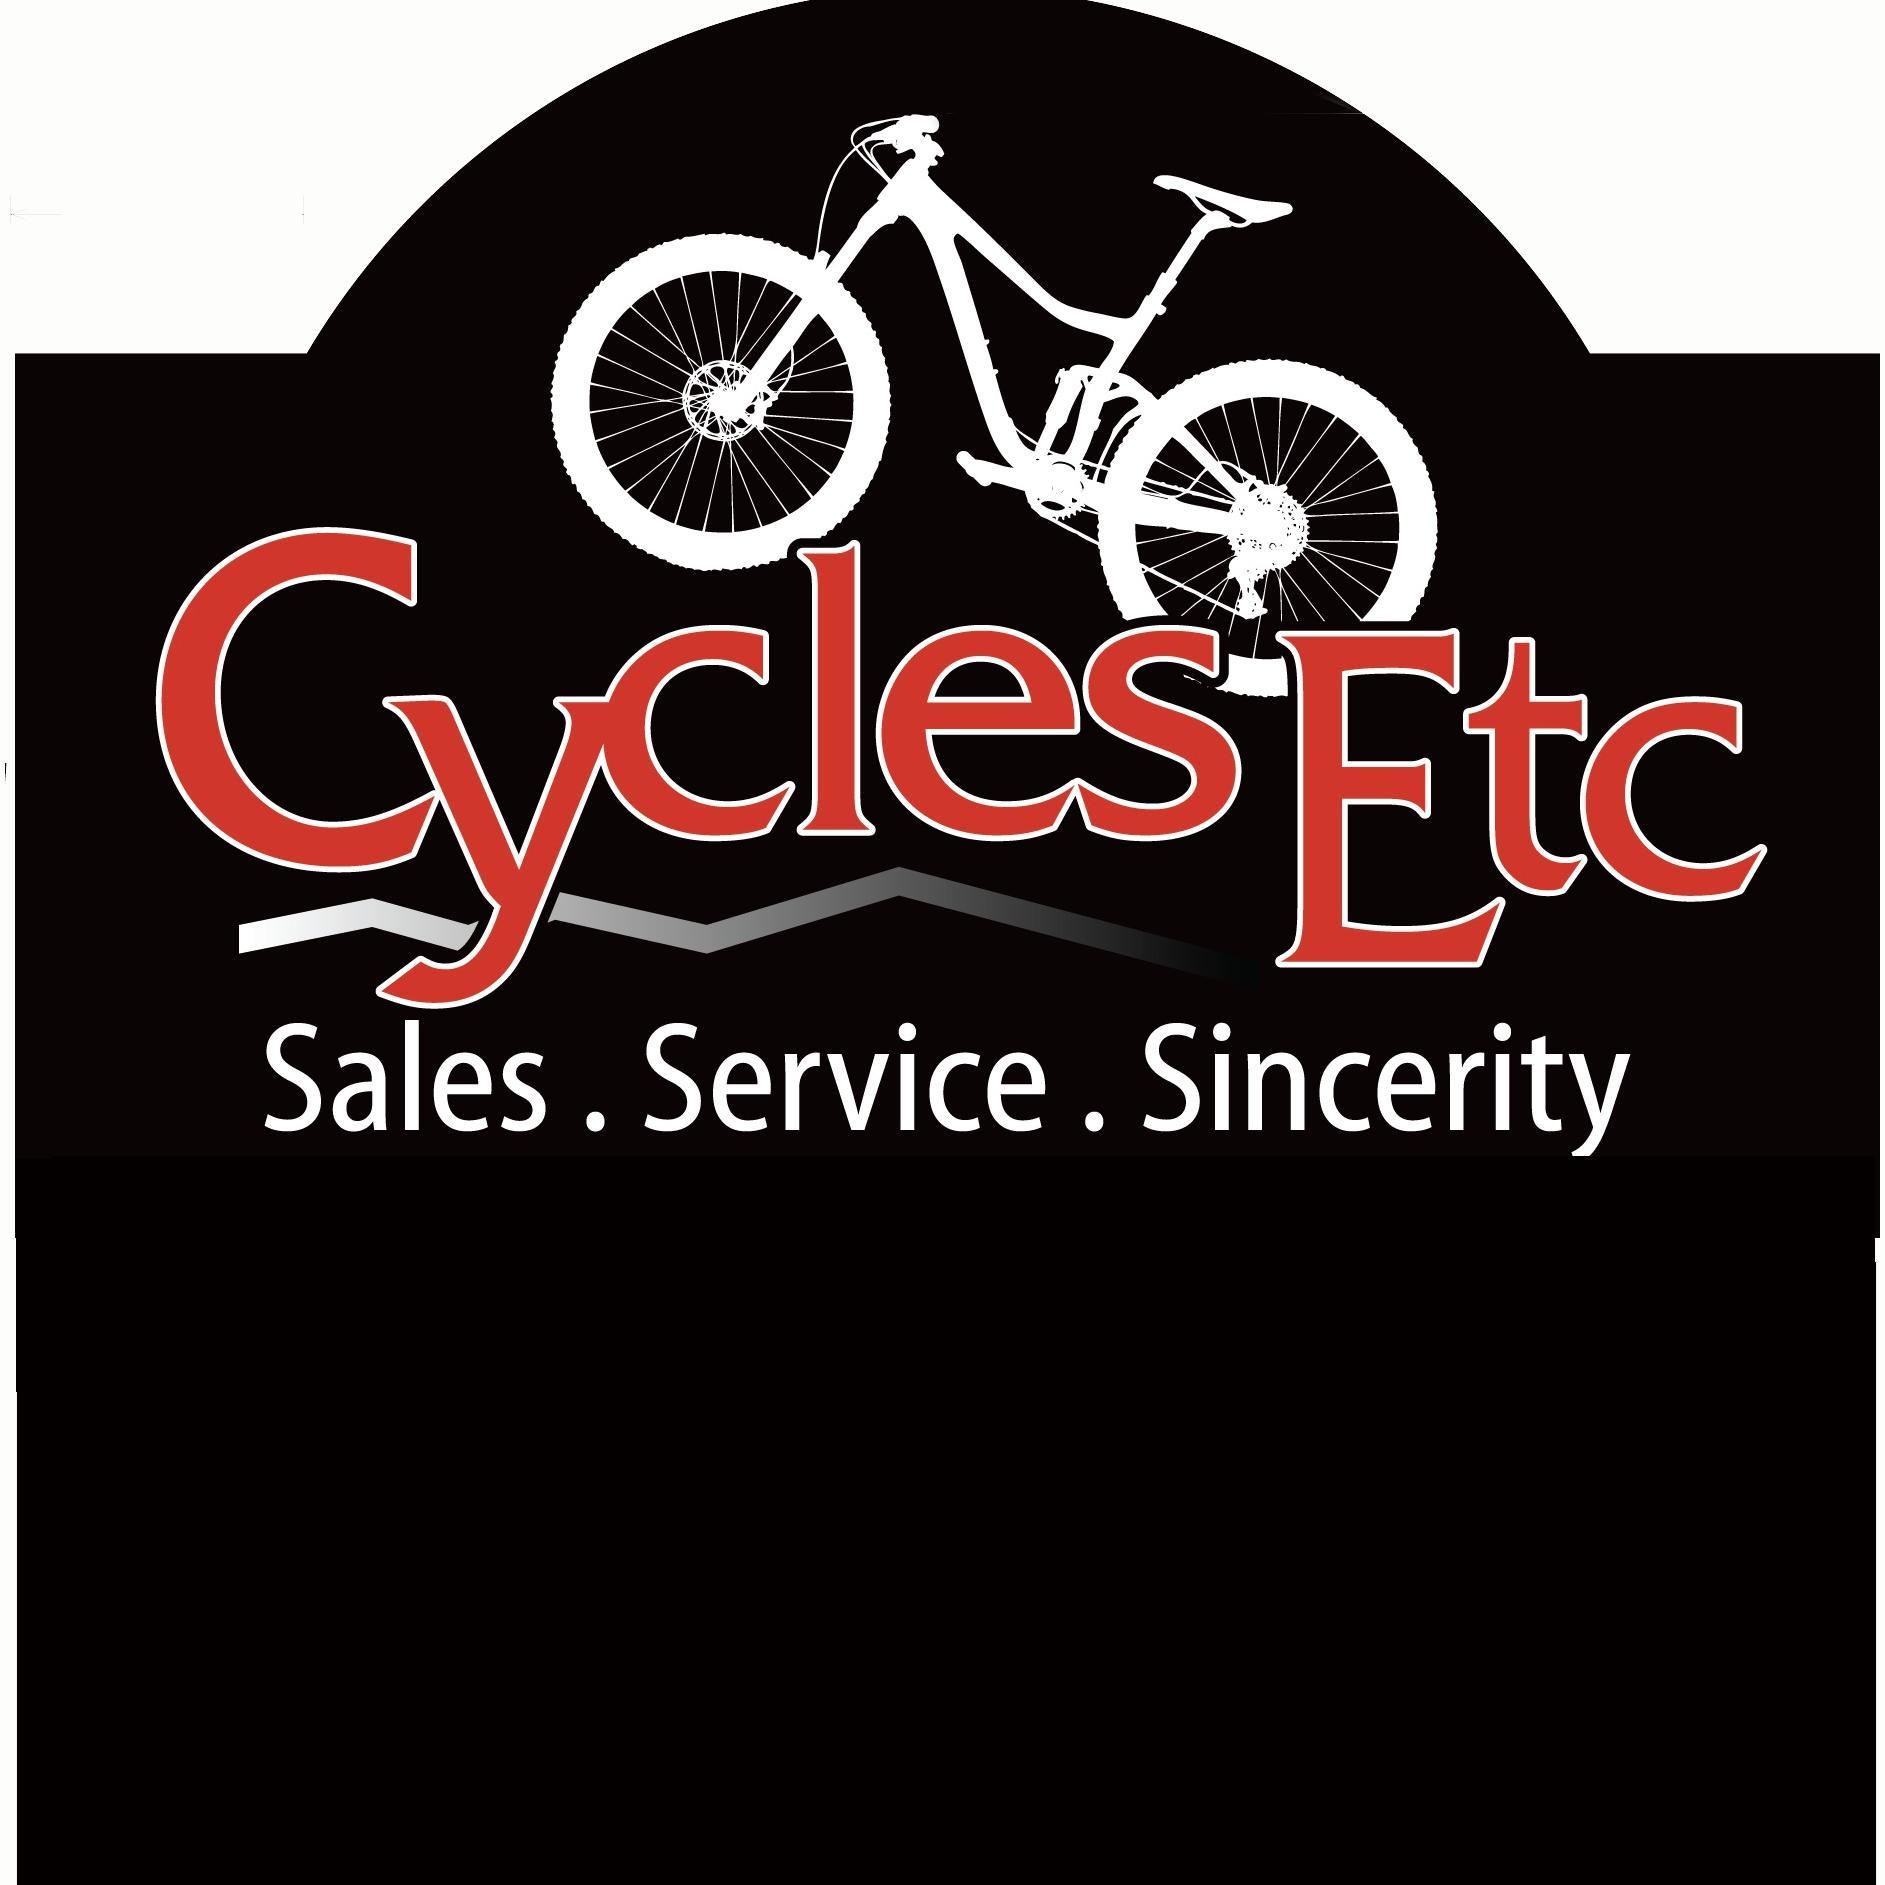 Southern NH's Finest Bicycle Experts at Your Service. Providing Sales, Service, and Sincerity since 1990.